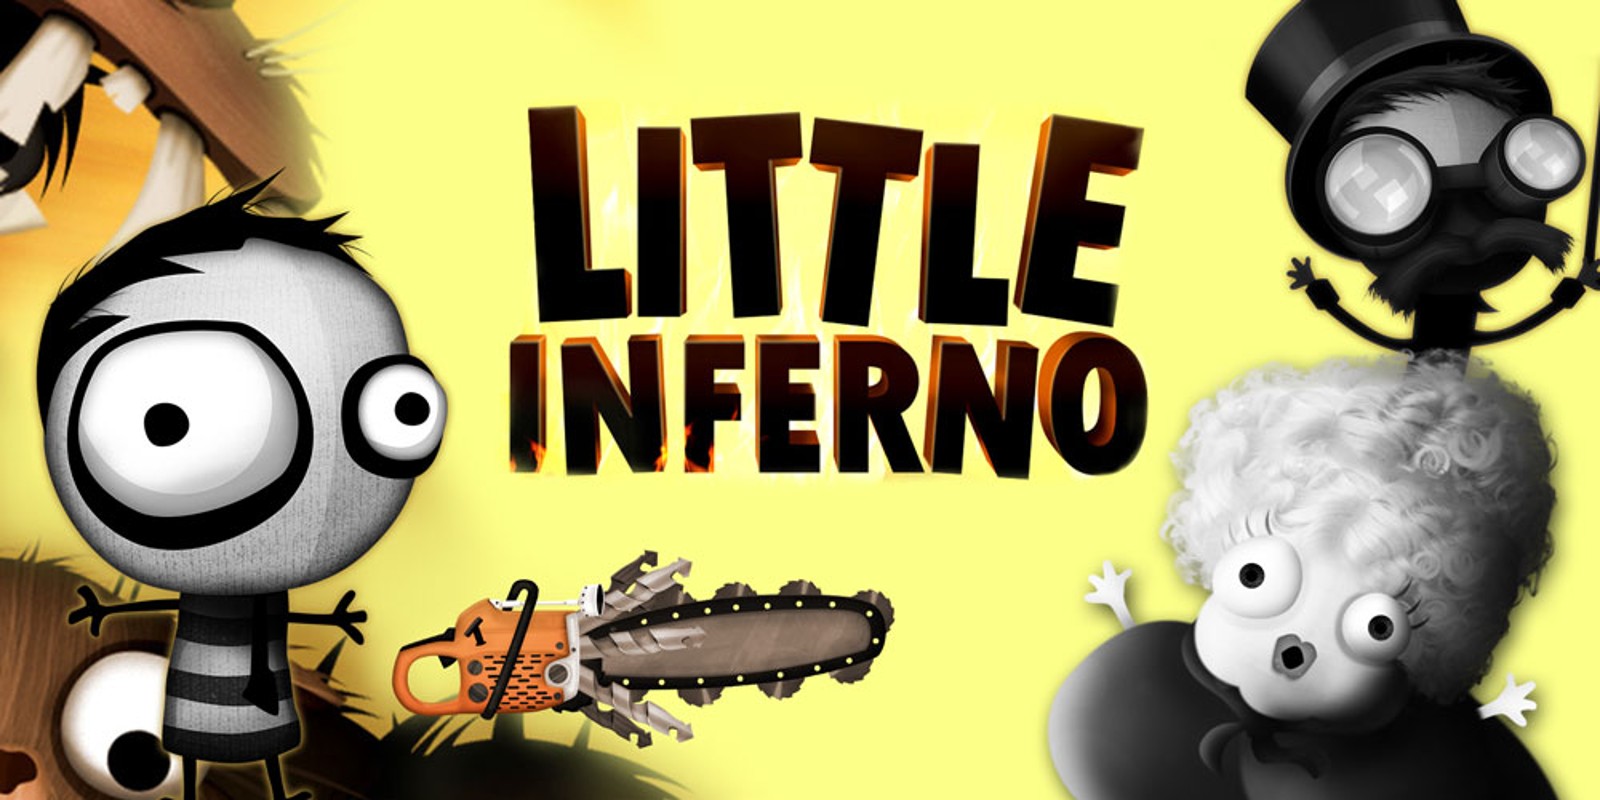 Little Inferno APK Full Version Free Download (Oct 2021)